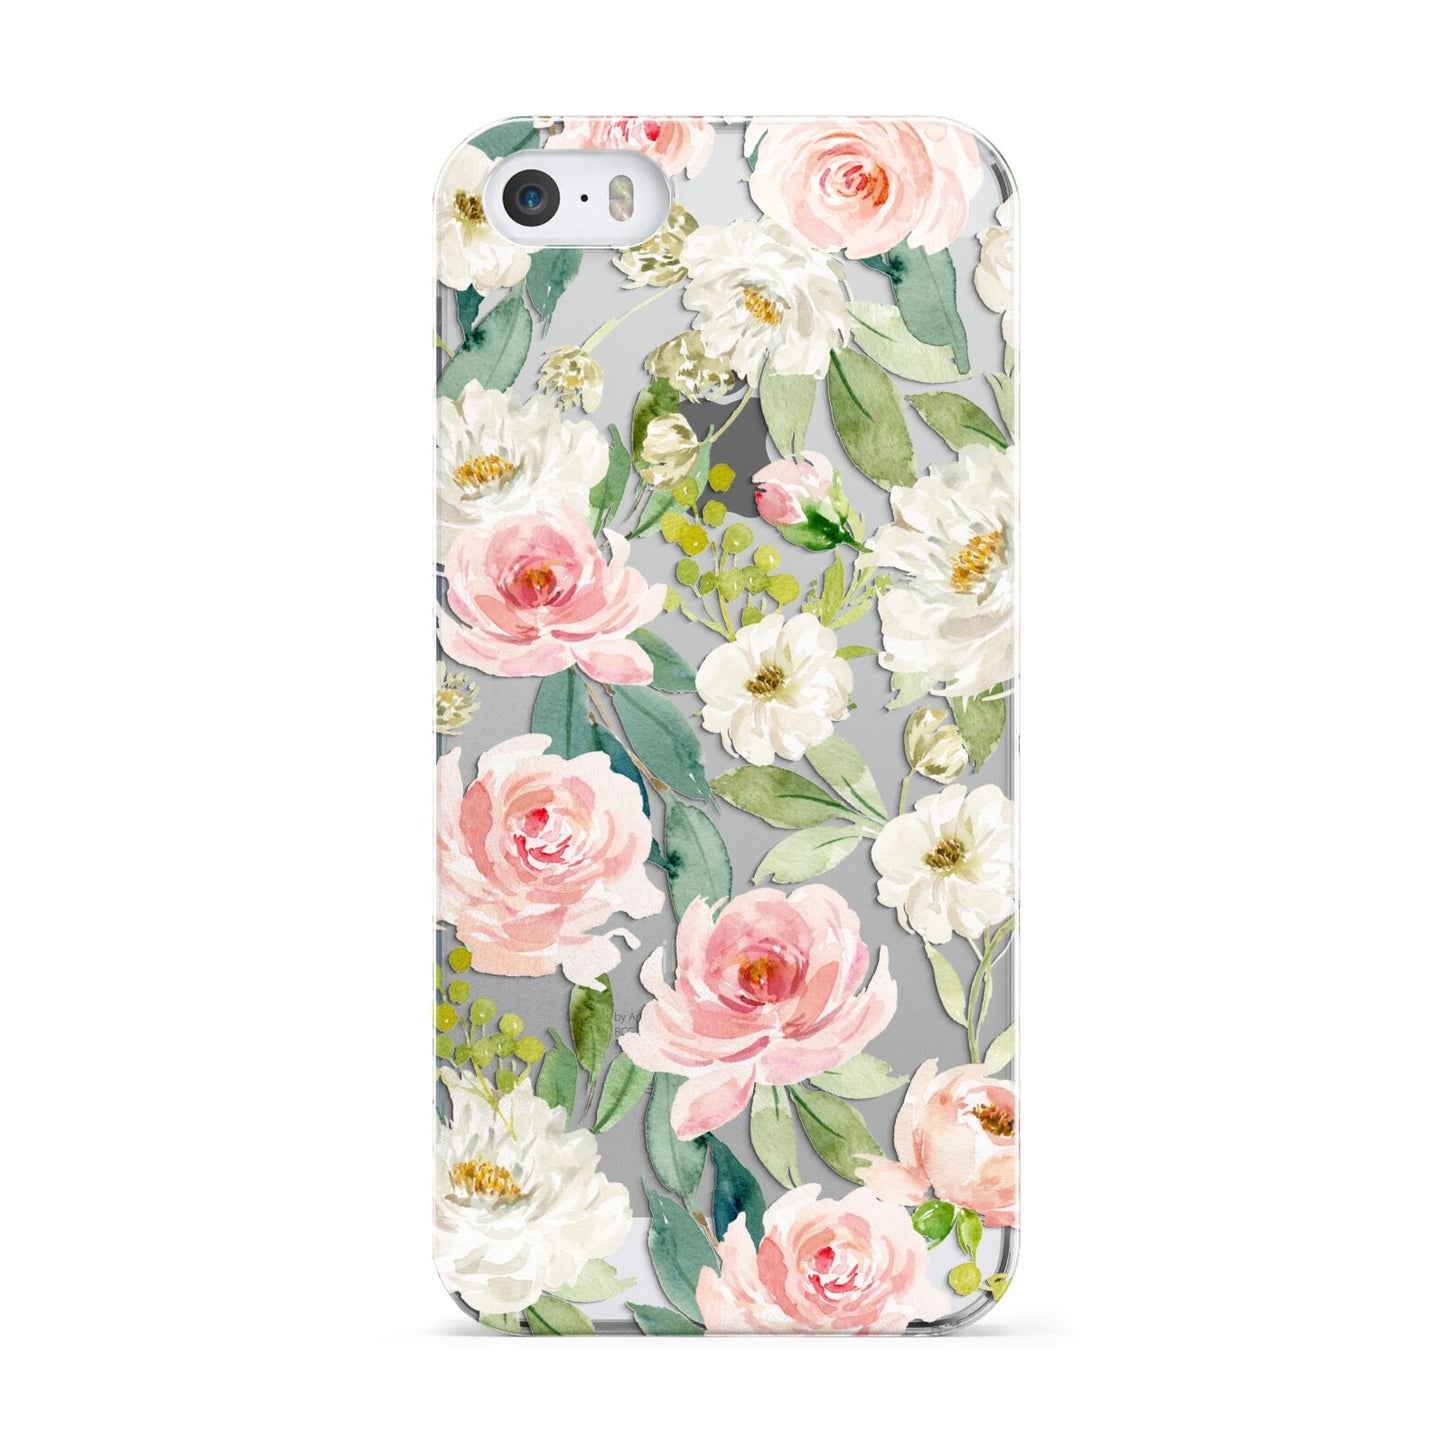 Watercolour Peonies Roses and Foliage Apple iPhone 5 Case